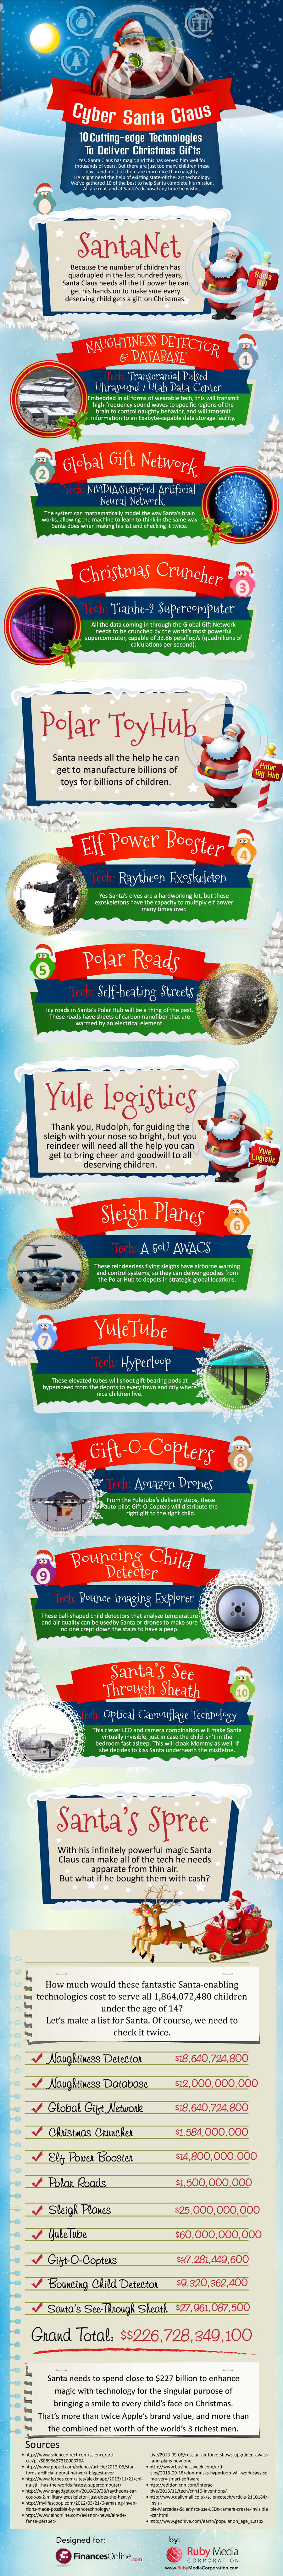 Cyber Santa Claus: Amazon Drones, Supercomputers and Other Cutting-edge Technologies Santa Can Use To Deliver Christmas Gifts